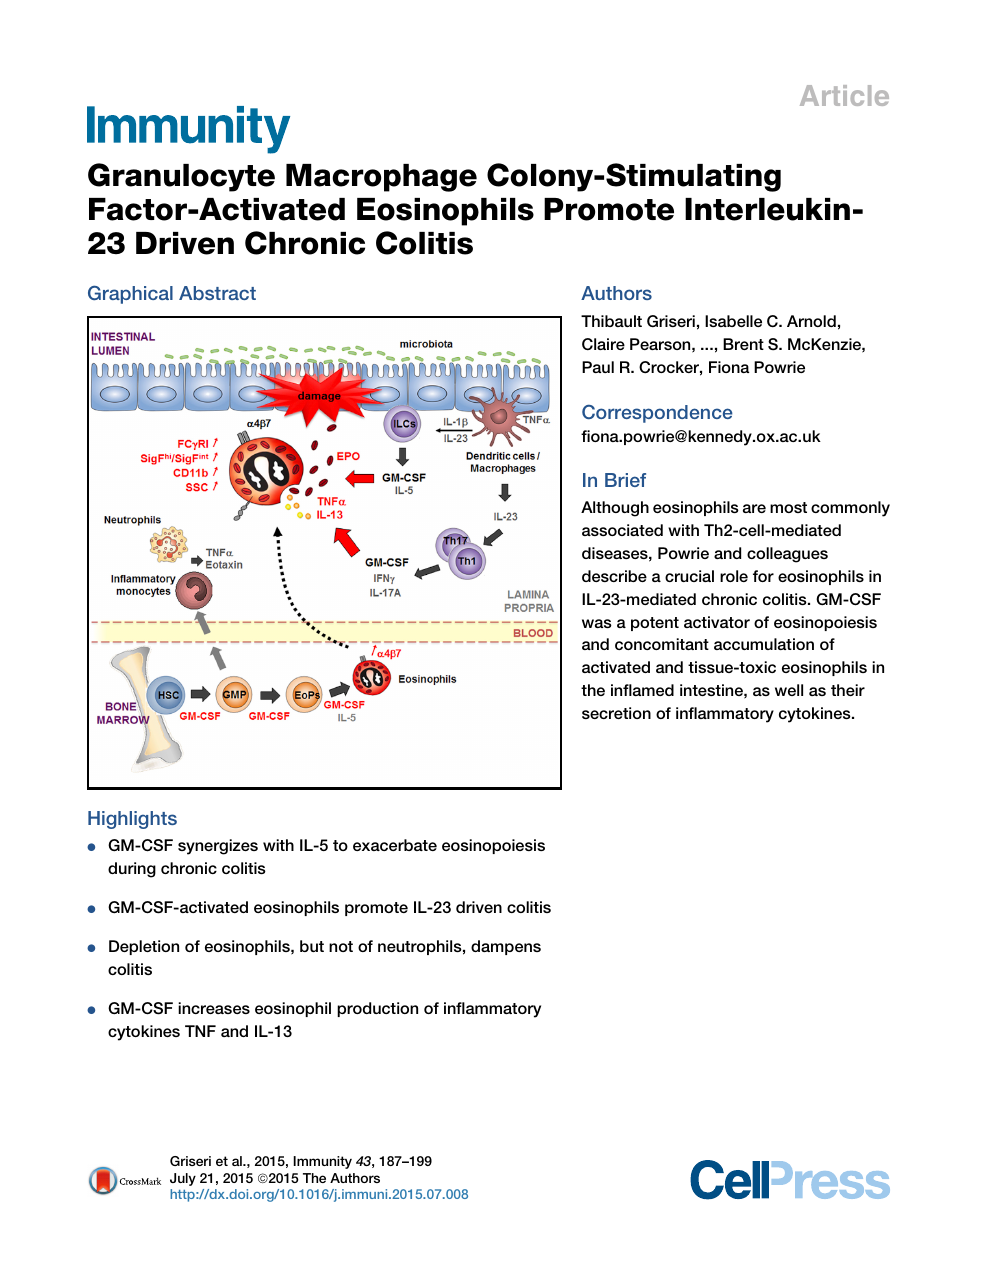 Granulocyte Macrophage Colony Stimulating Factor Activated Eosinophils Promote Interleukin 23 Driven Chronic Colitis Topic Of Research Paper In Biological Sciences Download Scholarly Article Pdf And Read For Free On Cyberleninka Open Science Hub